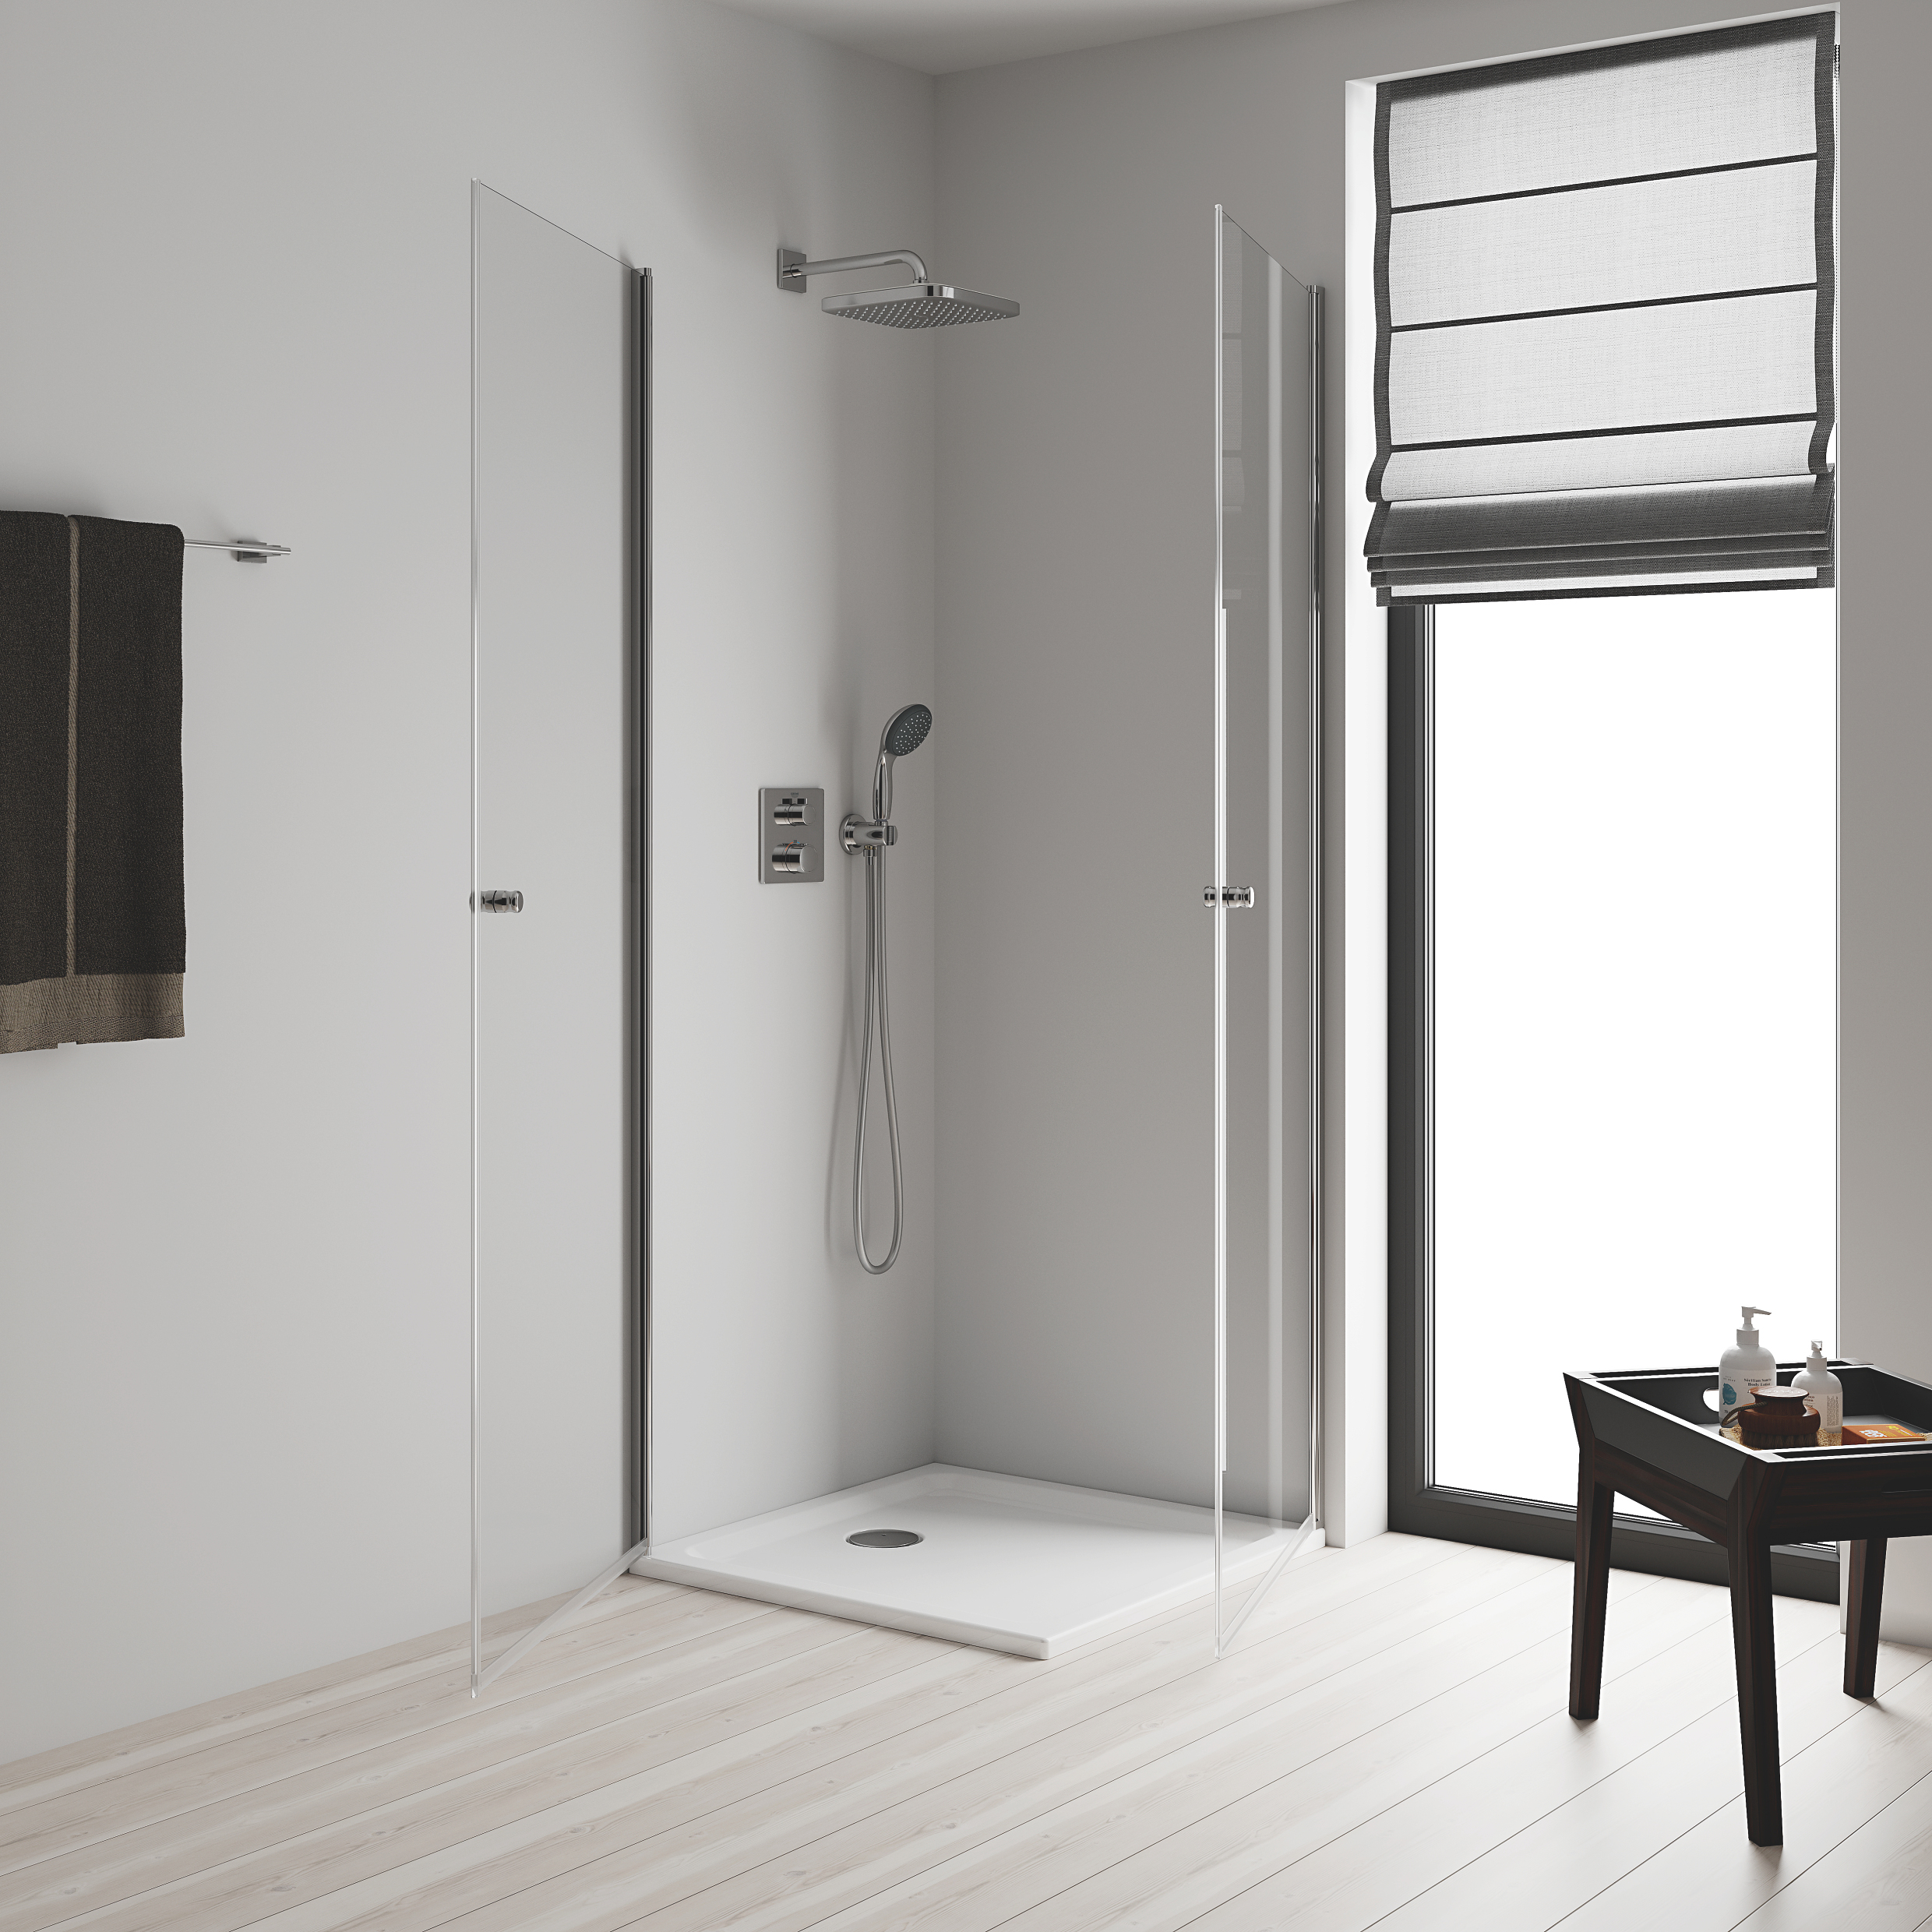 Start shower. Grohe Tempesta Cosmopolitan System 250. Grohe Tempesta Cosmopolitan 250. Tempesta Cosmopolitan System 250 Cube. Grohe 26692000.